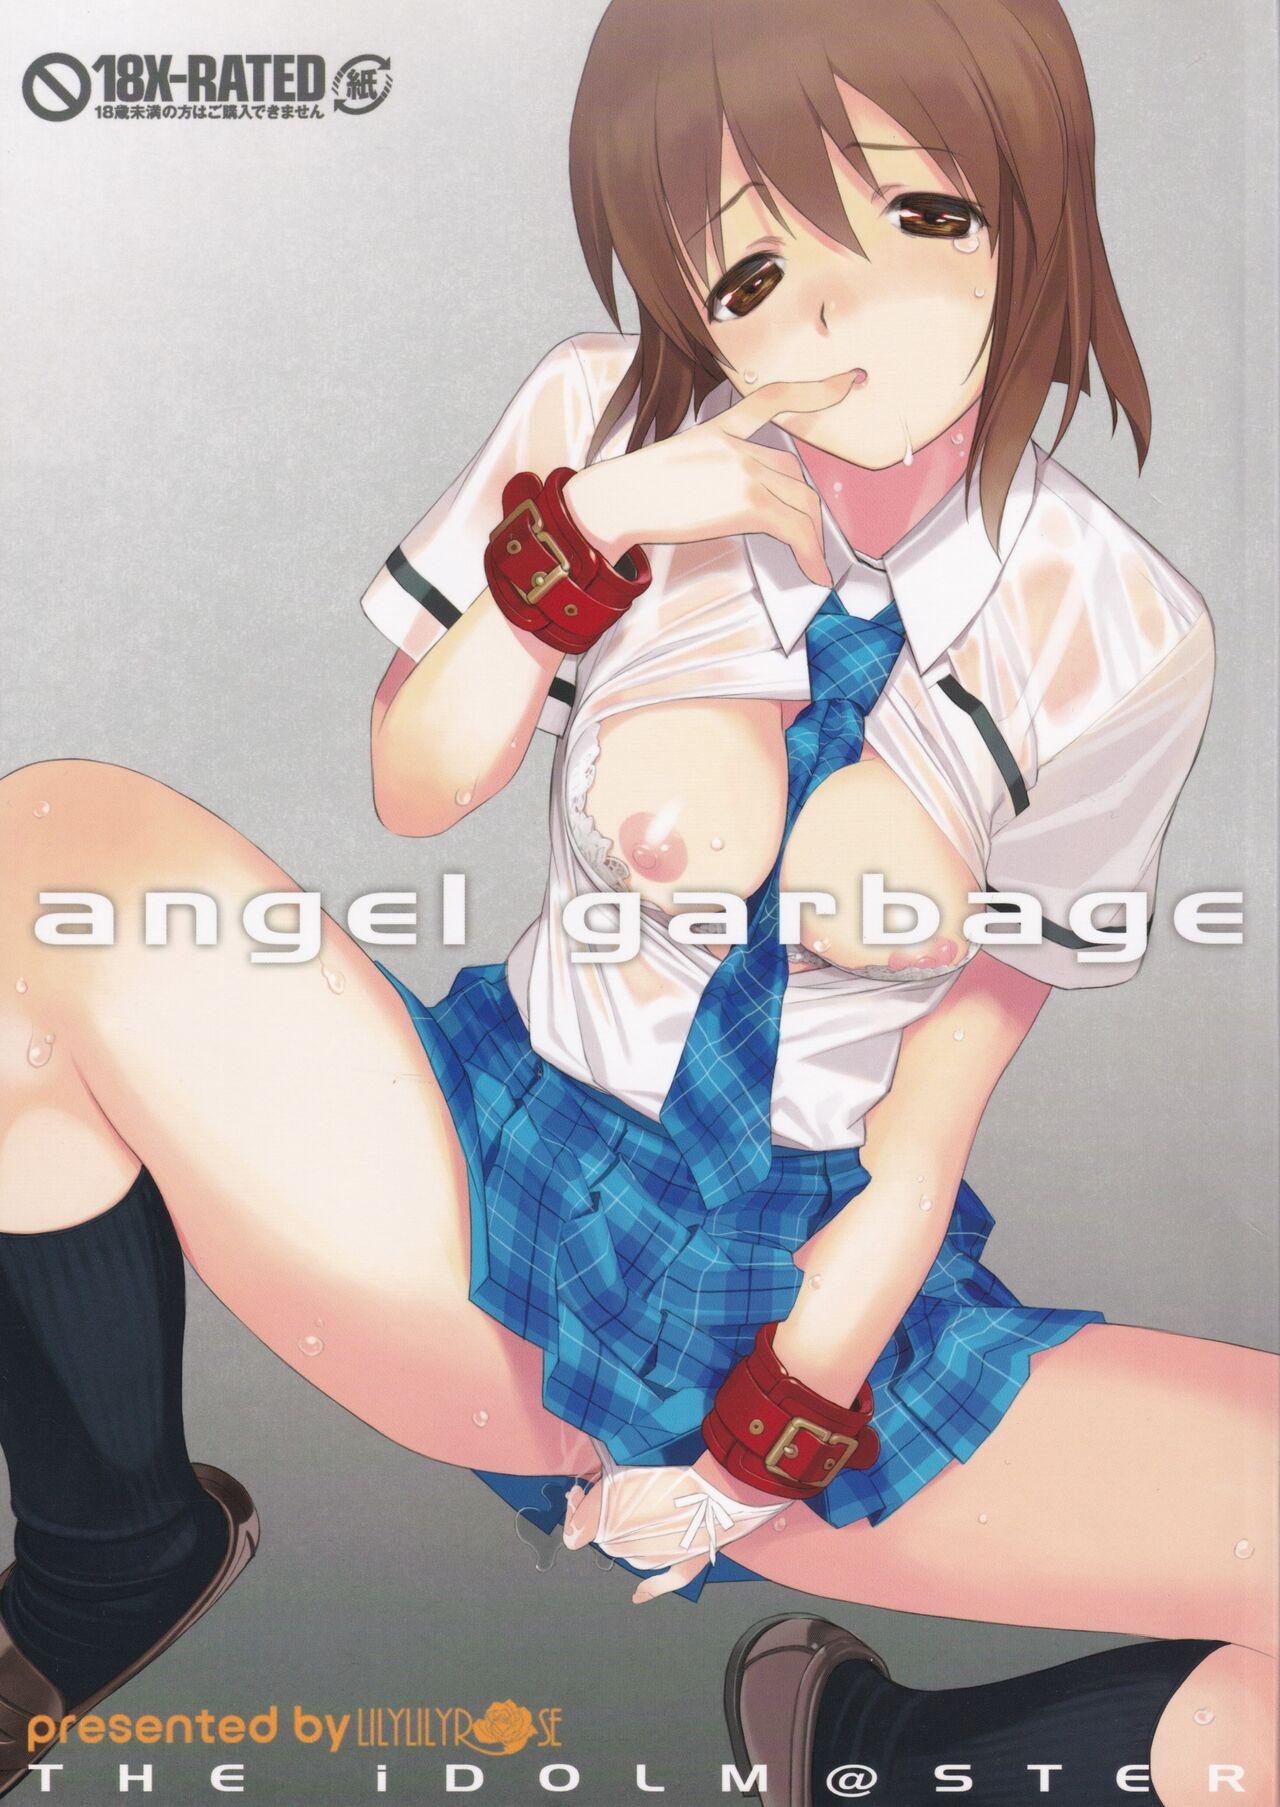 Amador angel garbage - The idolmaster Ride - Picture 1